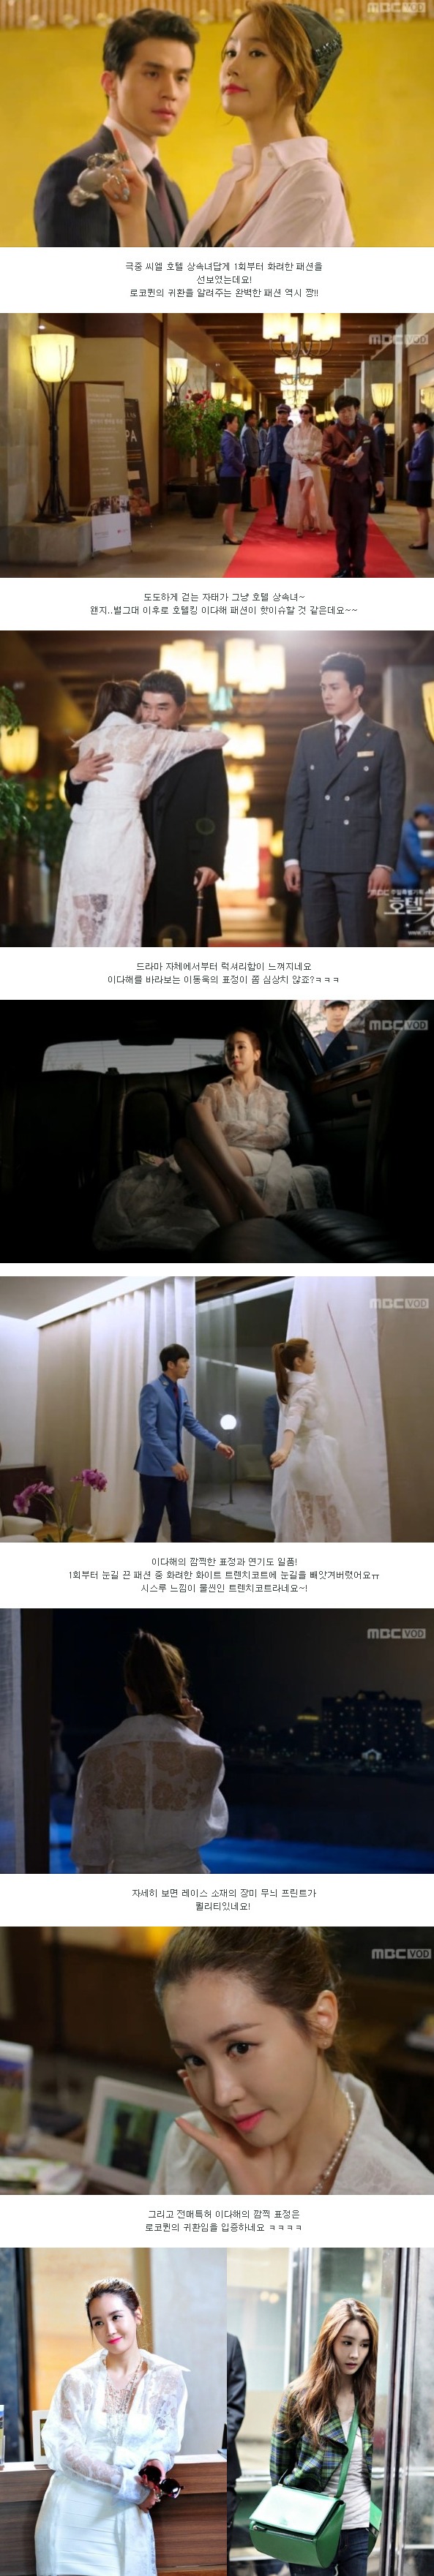 episodes 1 and 2 captures for the Korean drama 'Hotel King'